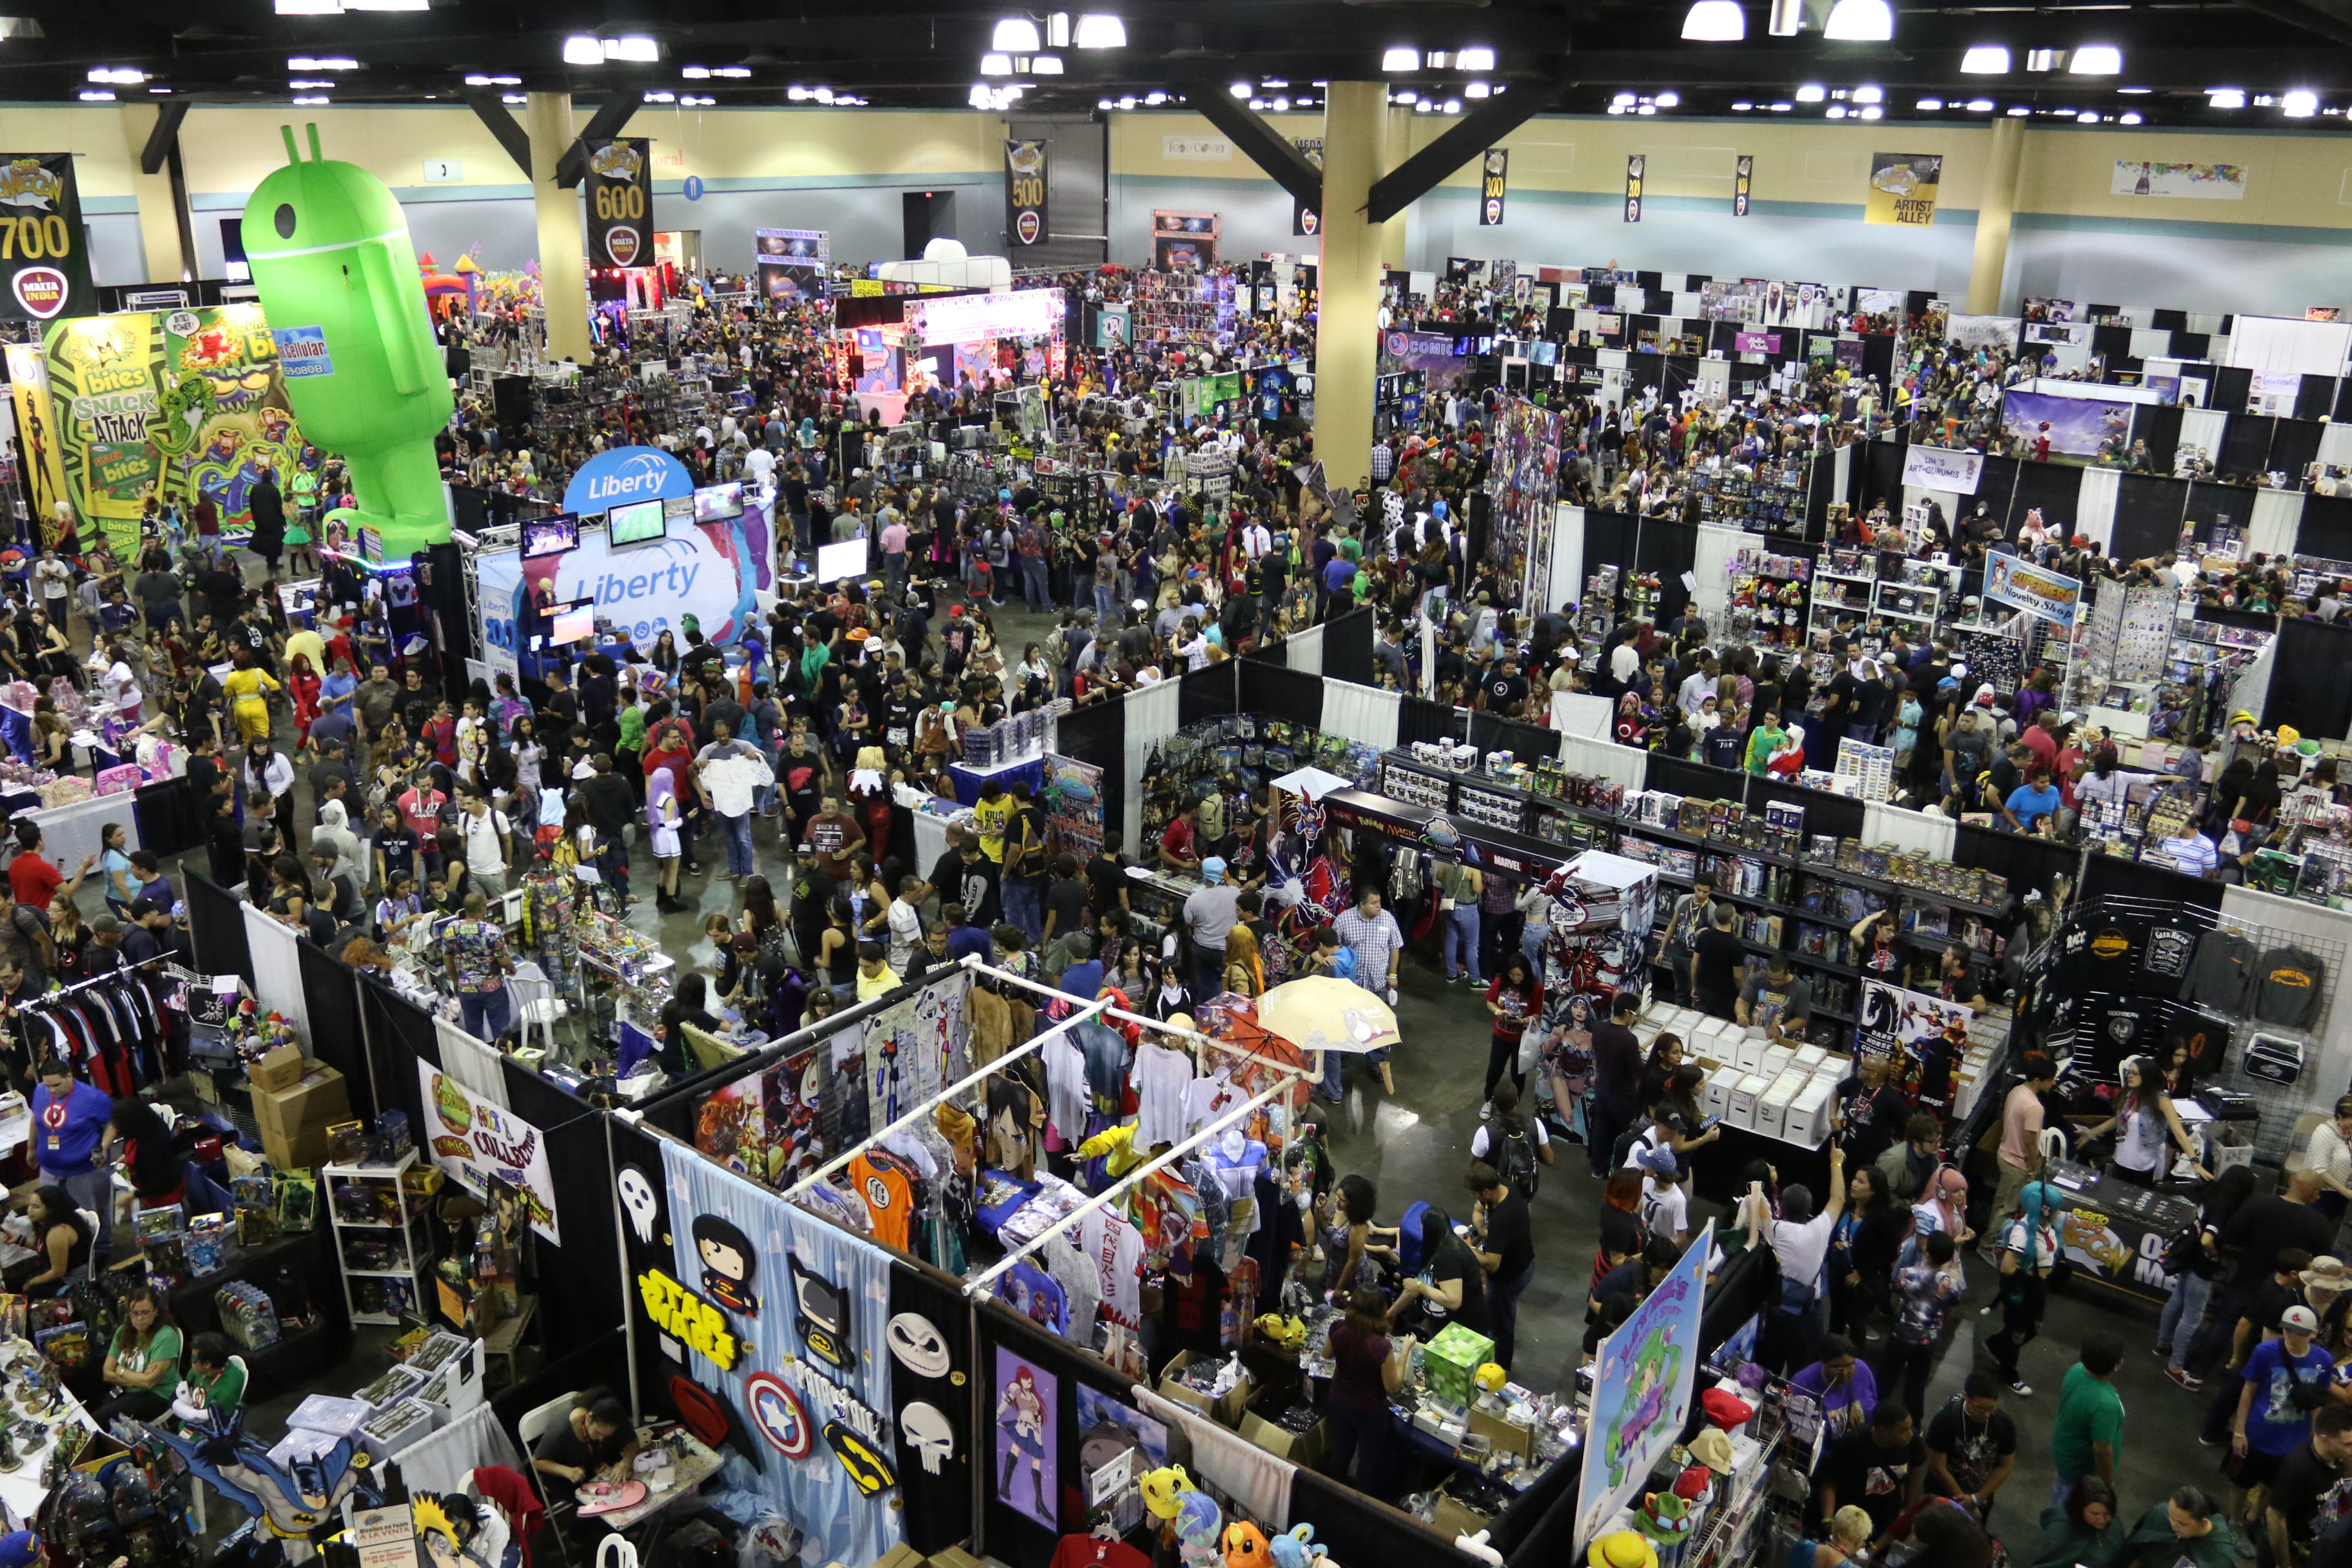 Over 40K fans strong descended on Puerto Rico Comic Con 2016 over three days.